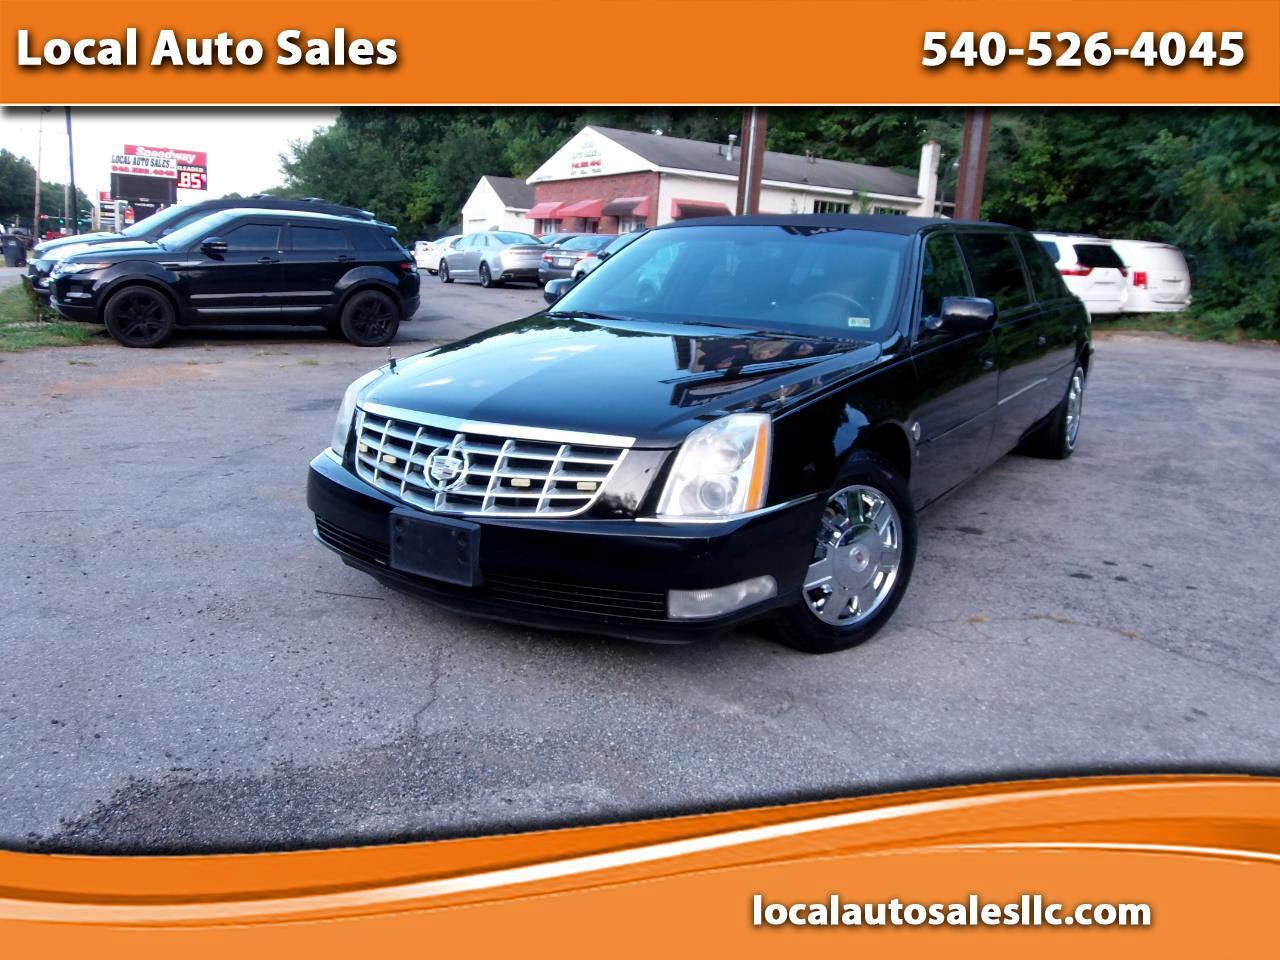 Cadillac DTS Professional 4dr Sdn Limousine 1SH 2008